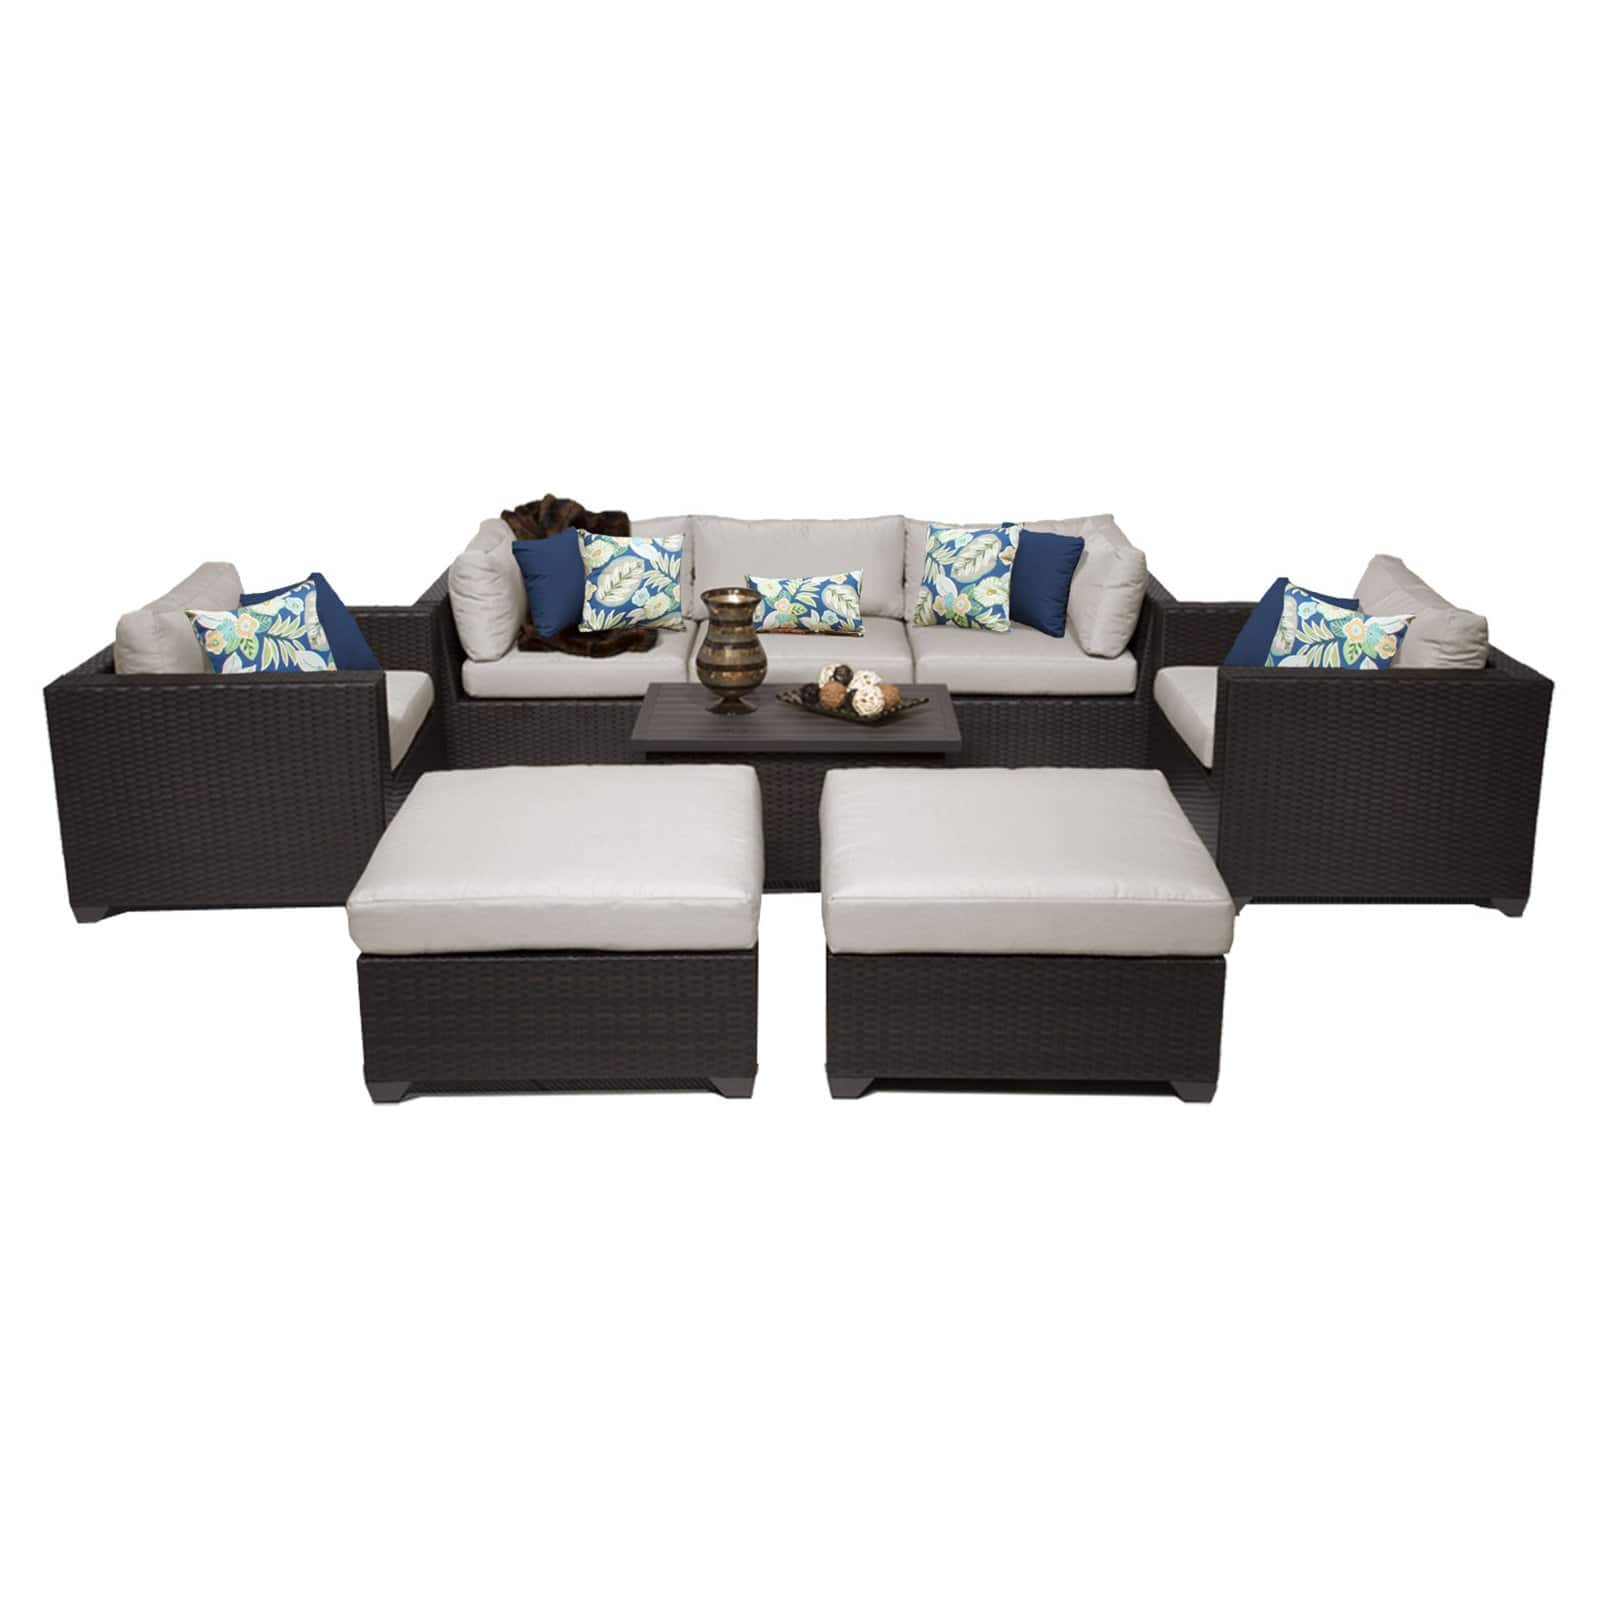 TK Classics Belle Wicker 8 Piece Patio Conversation Set with Ottoman and 2 Sets of Cushion Covers - image 2 of 2